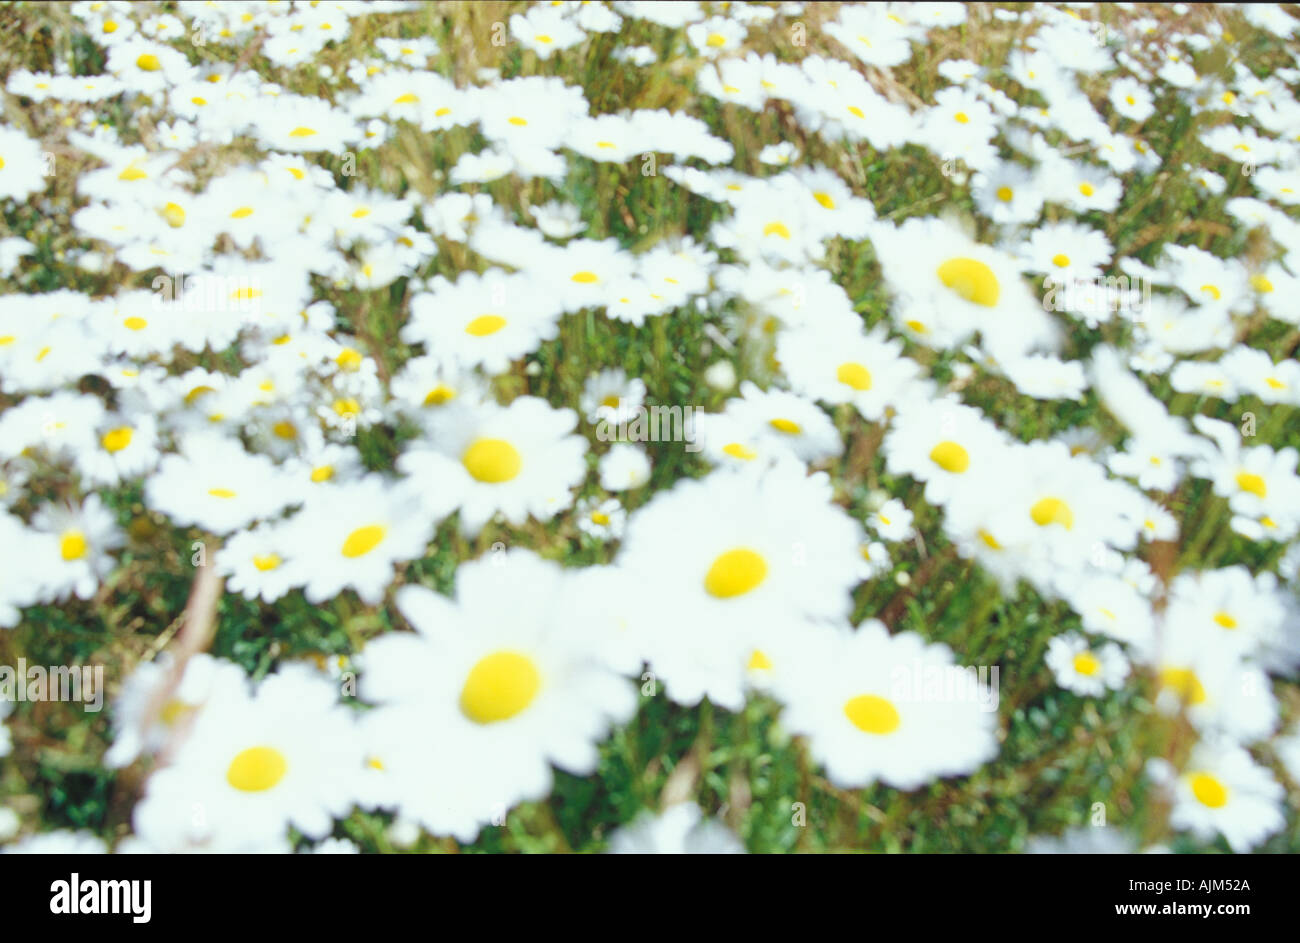 Field of white flowers as a background image. Stock Photo